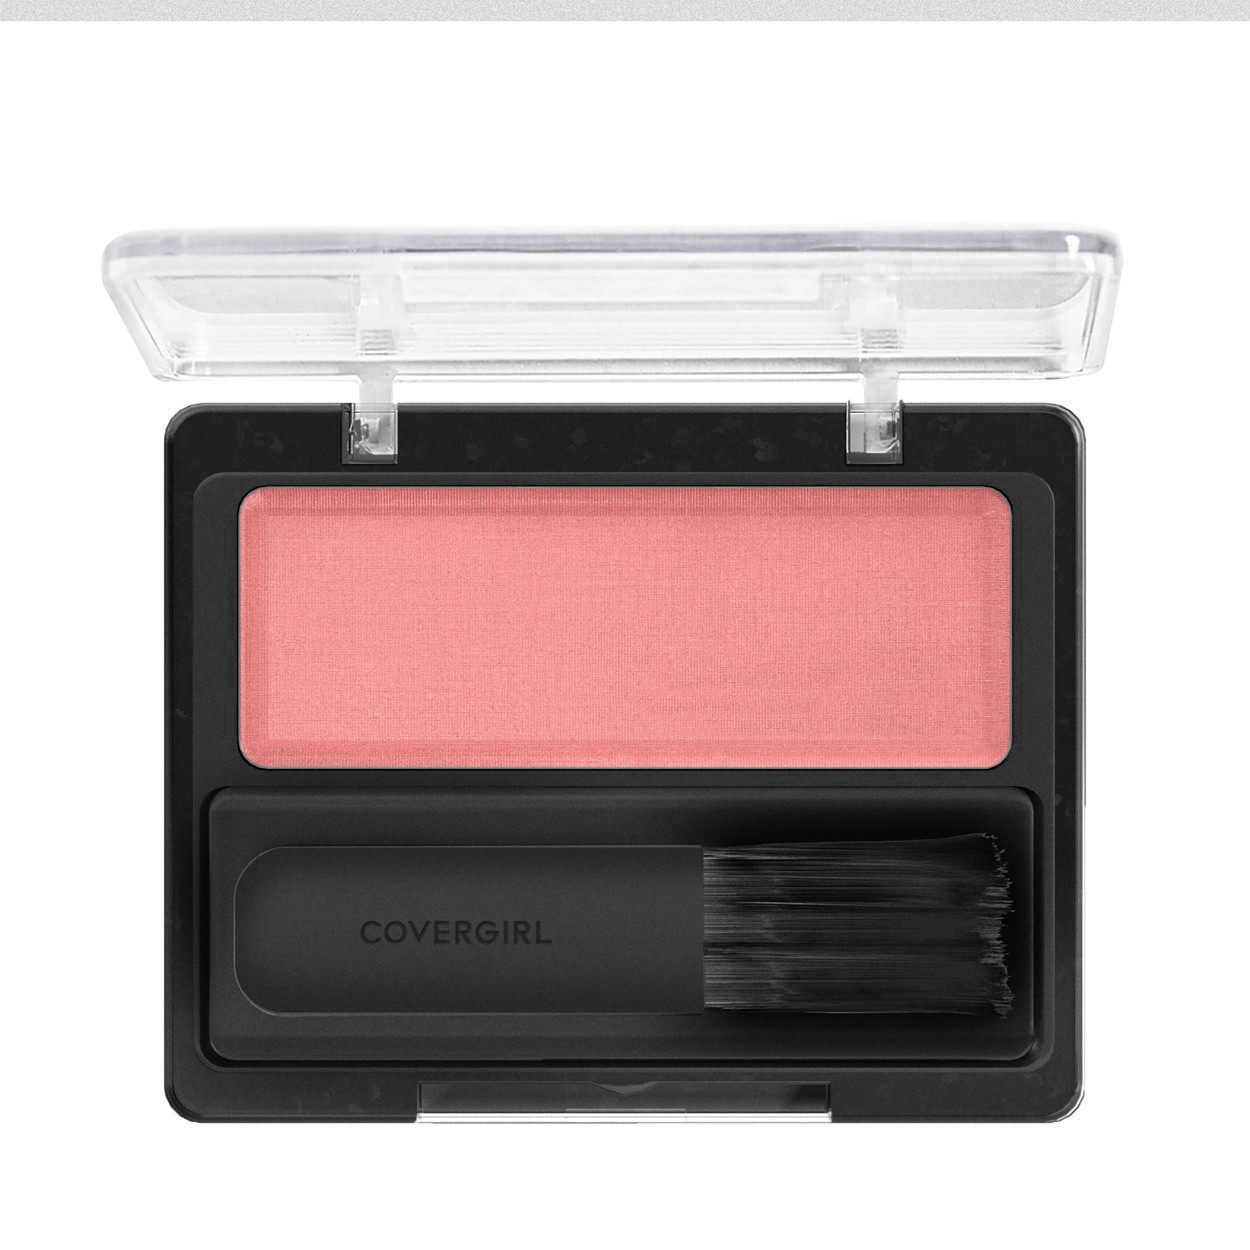 slide 3 of 42, Covergirl COVERGIRL Classic Color Blush Rose Silk, 1 ct